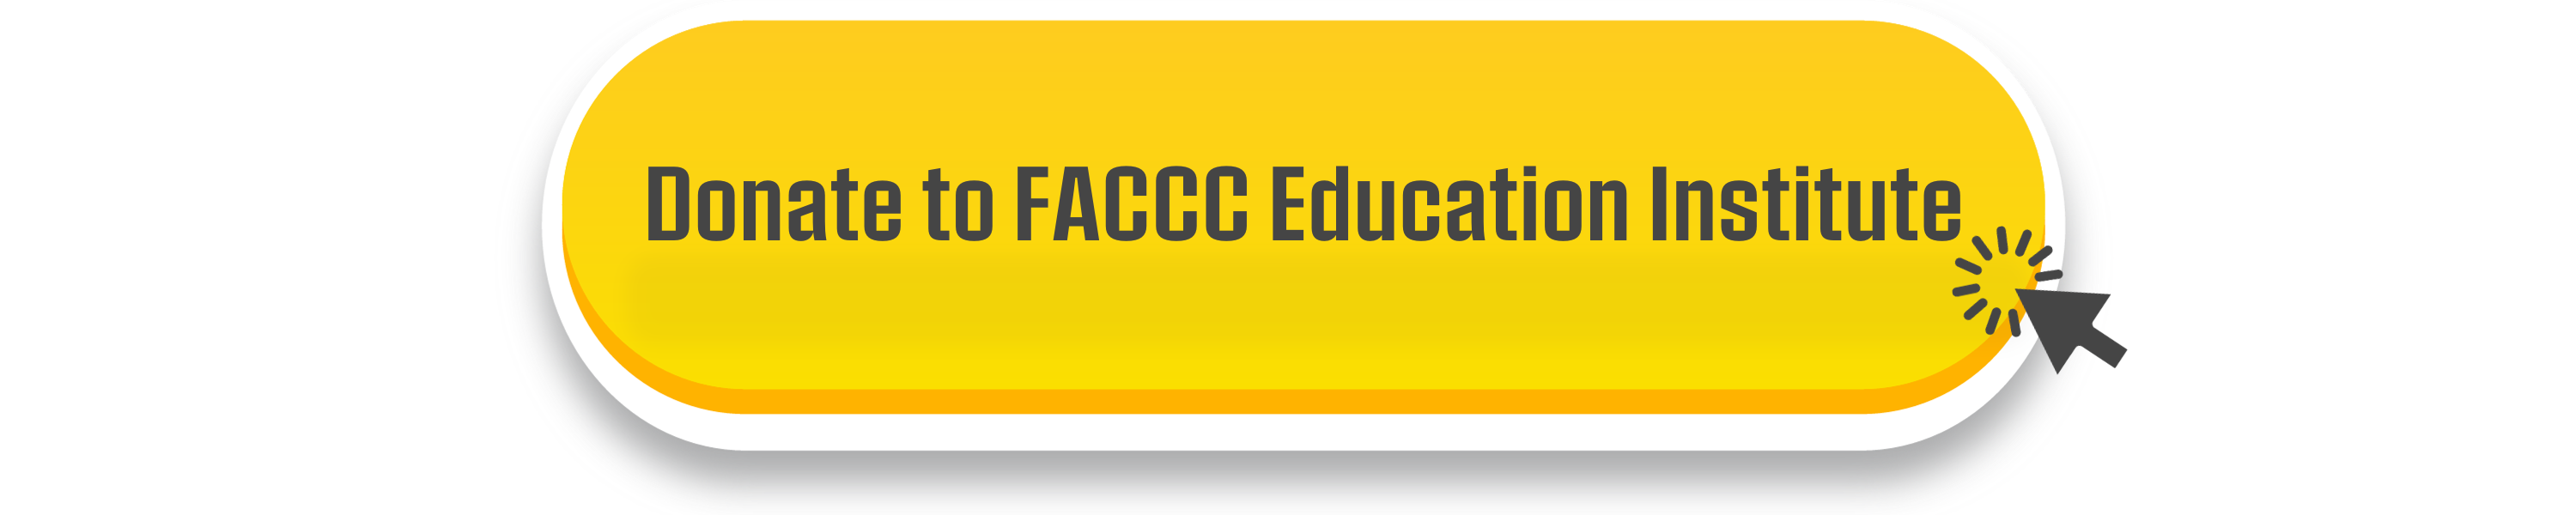 Faculty Association of California Community Colleges (FACCC